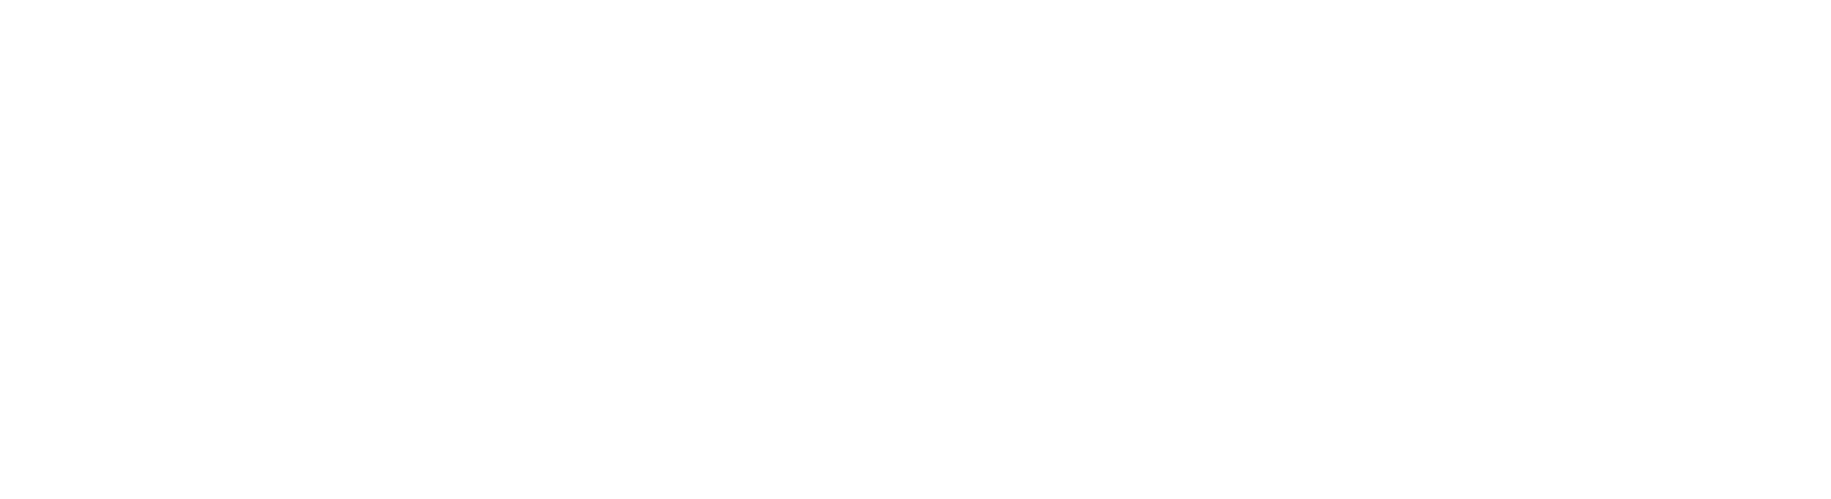 4th licensed egg farm coming soon in Singapore!